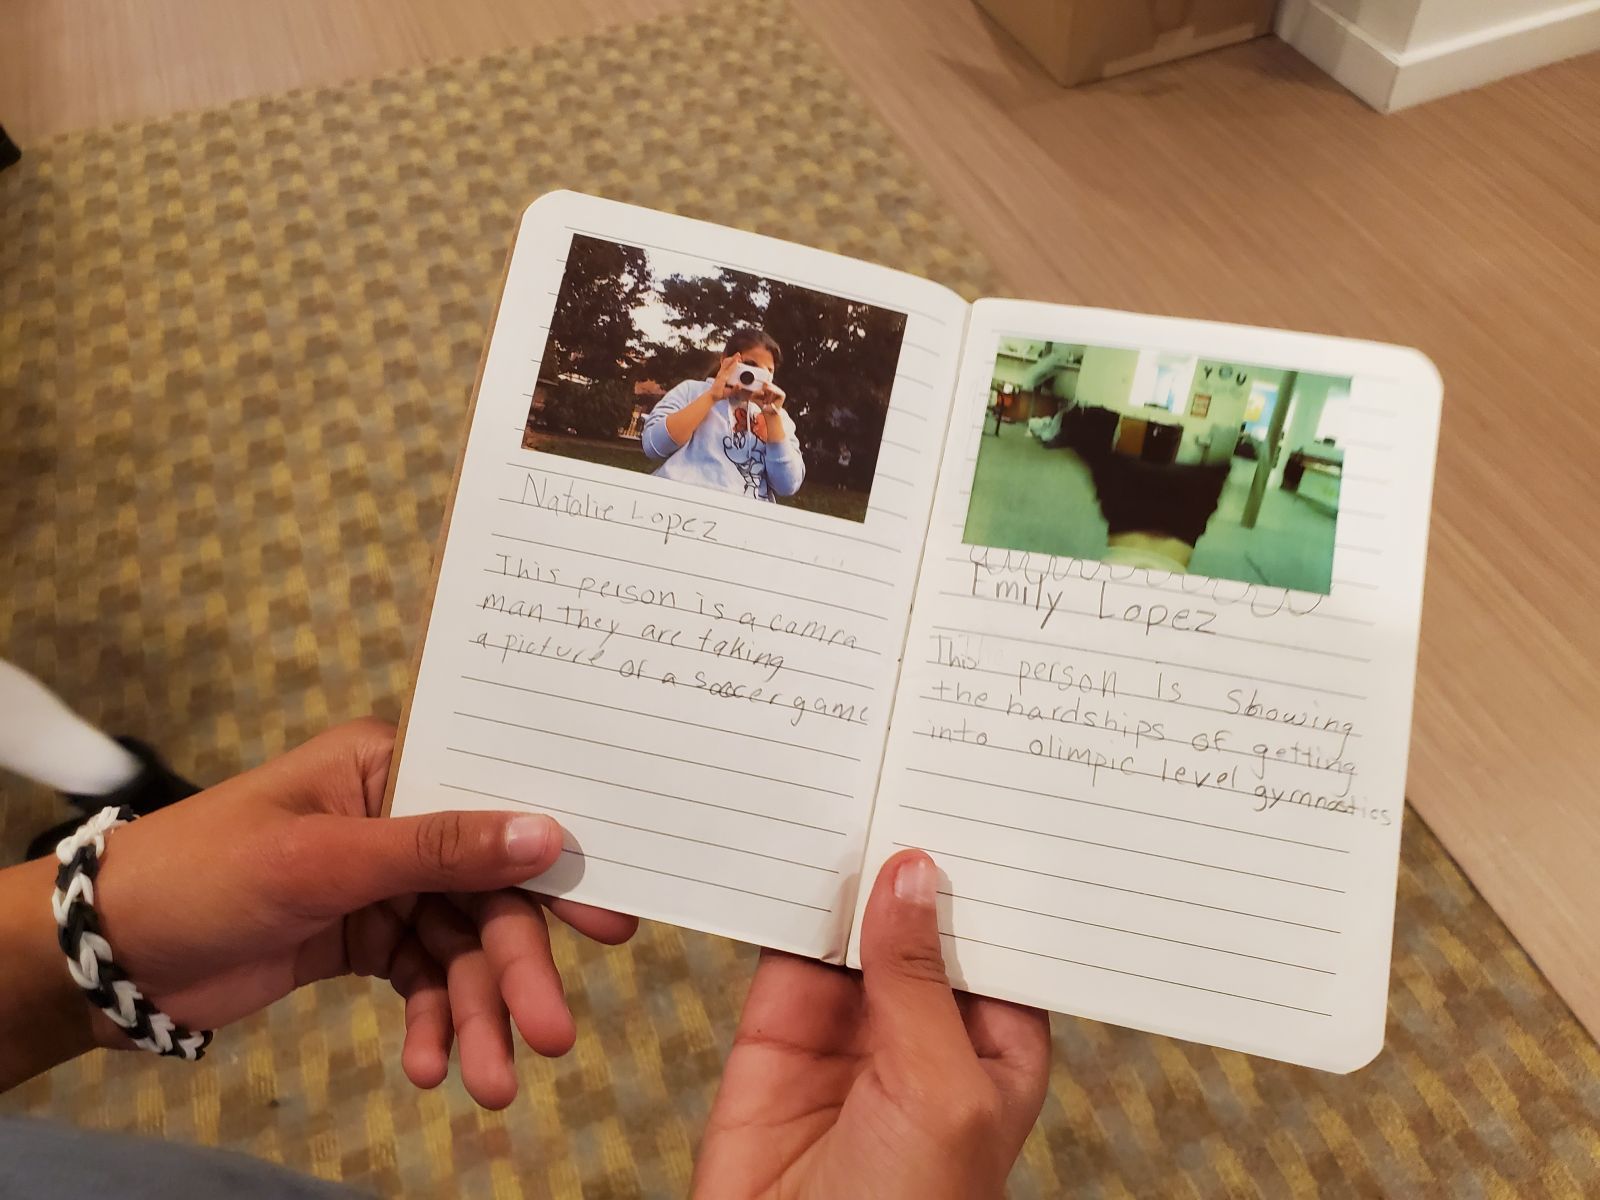 Two hands holding an open journal. On the left side of the page is an image of a girl taking a picture, with writing underneath. On the right is a photo of a room.